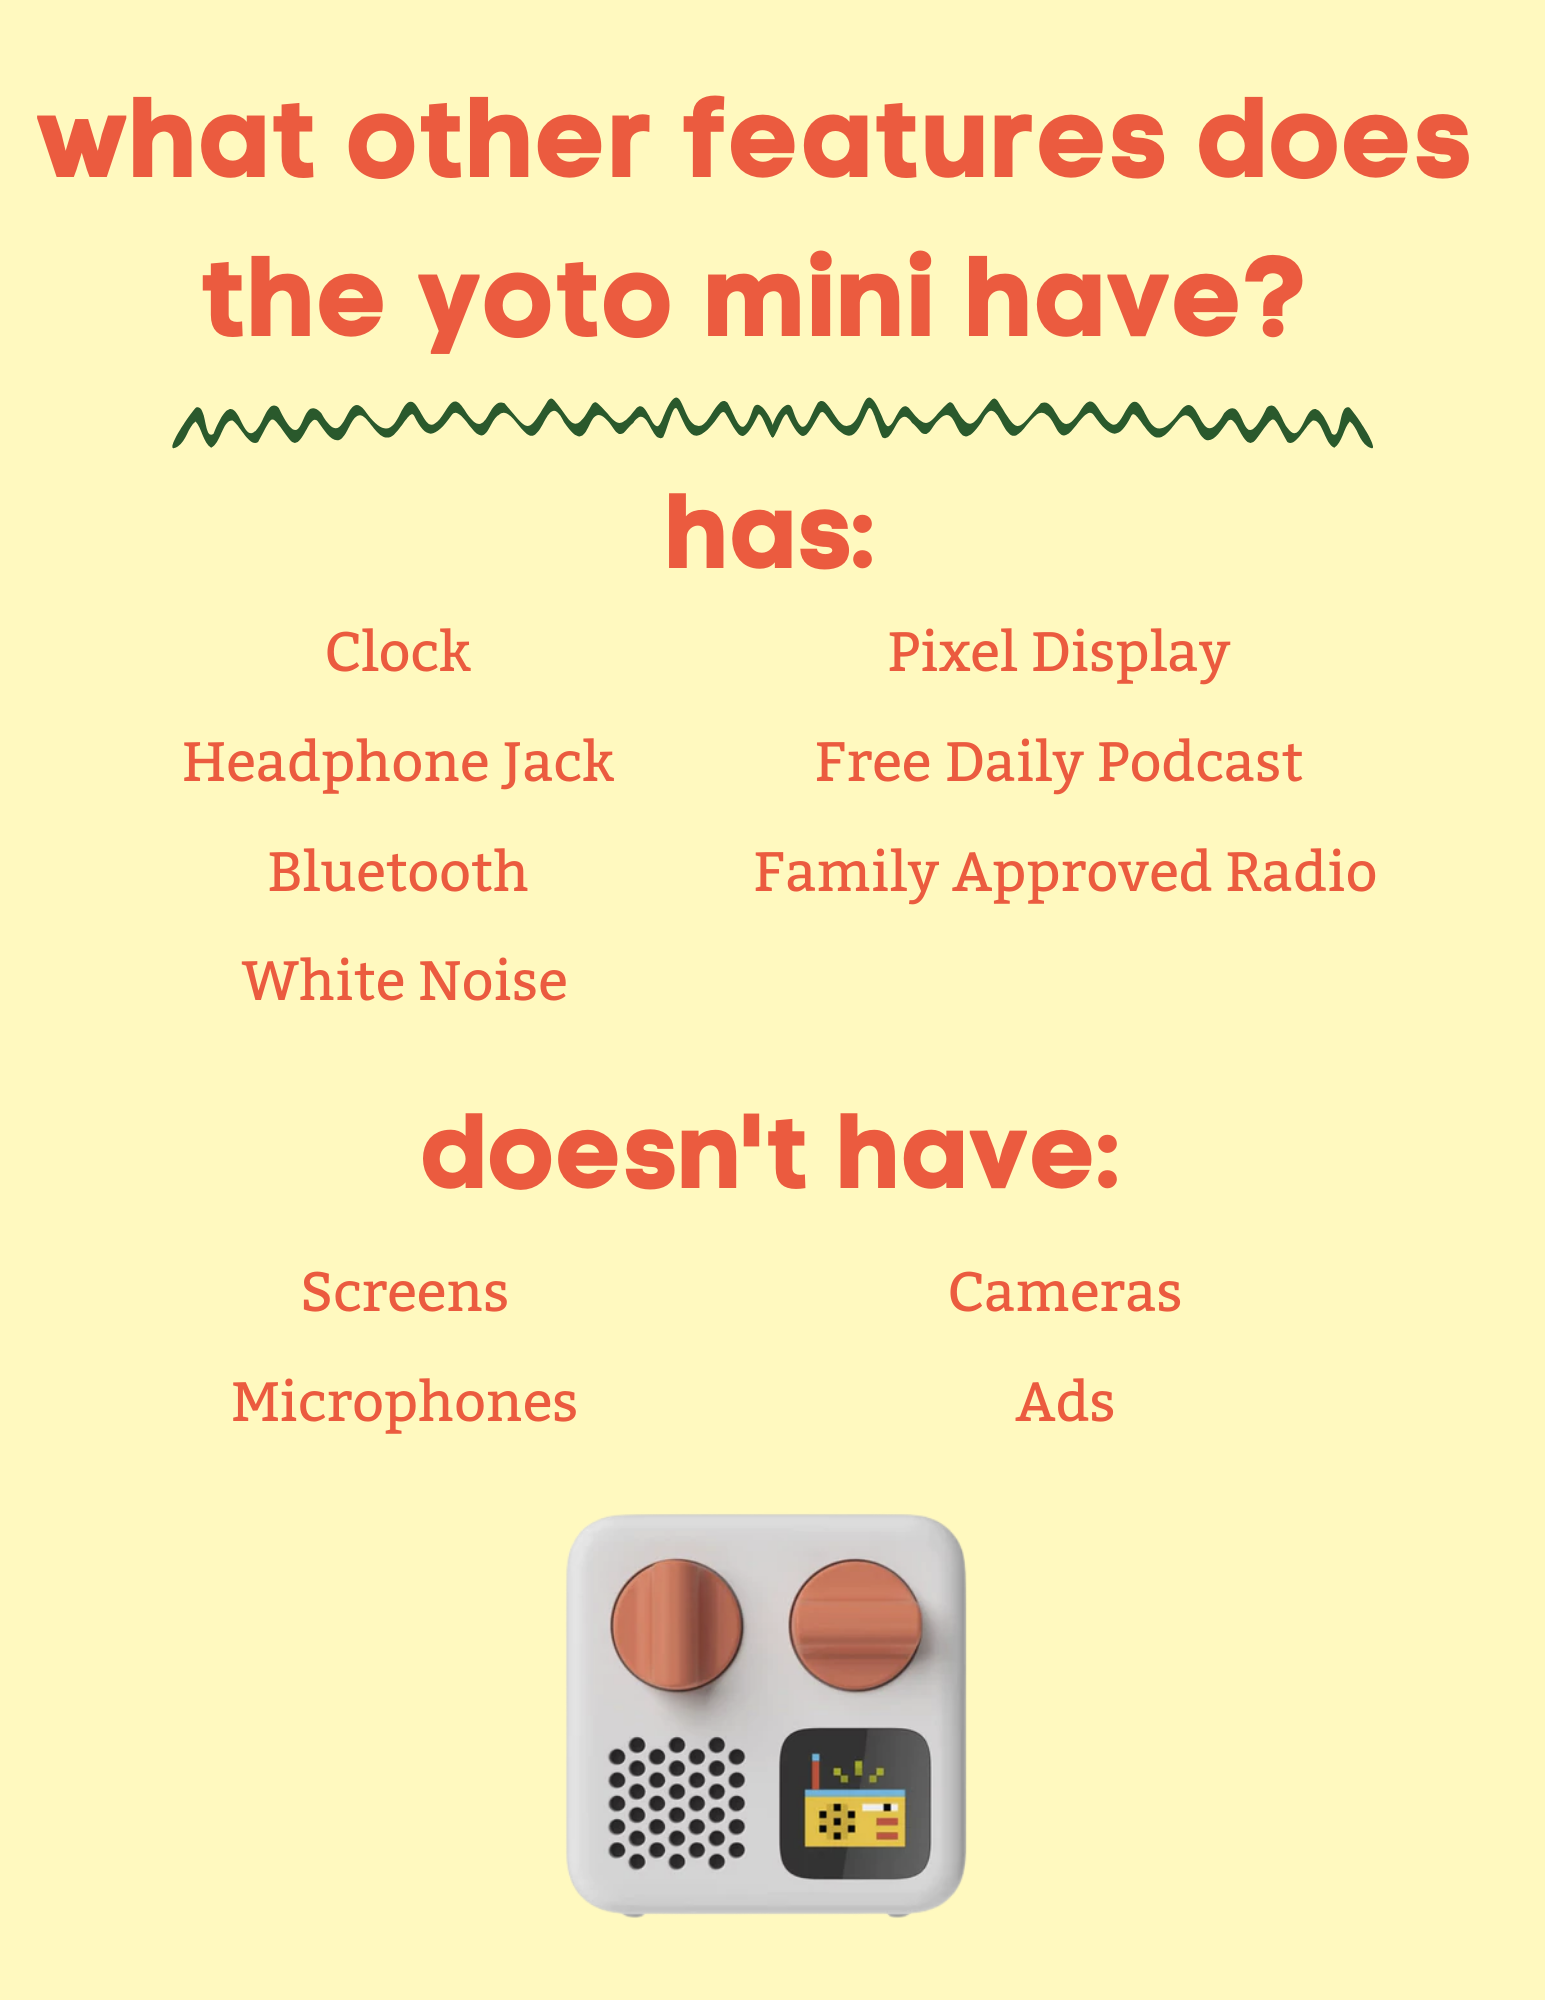 The Yoto mini can play all the same audio cards as the larger Yoto. It does have bluetooth, a pixel screen, and a daily podcast for kids. It also doesn't have screens, microphones, or ads. 